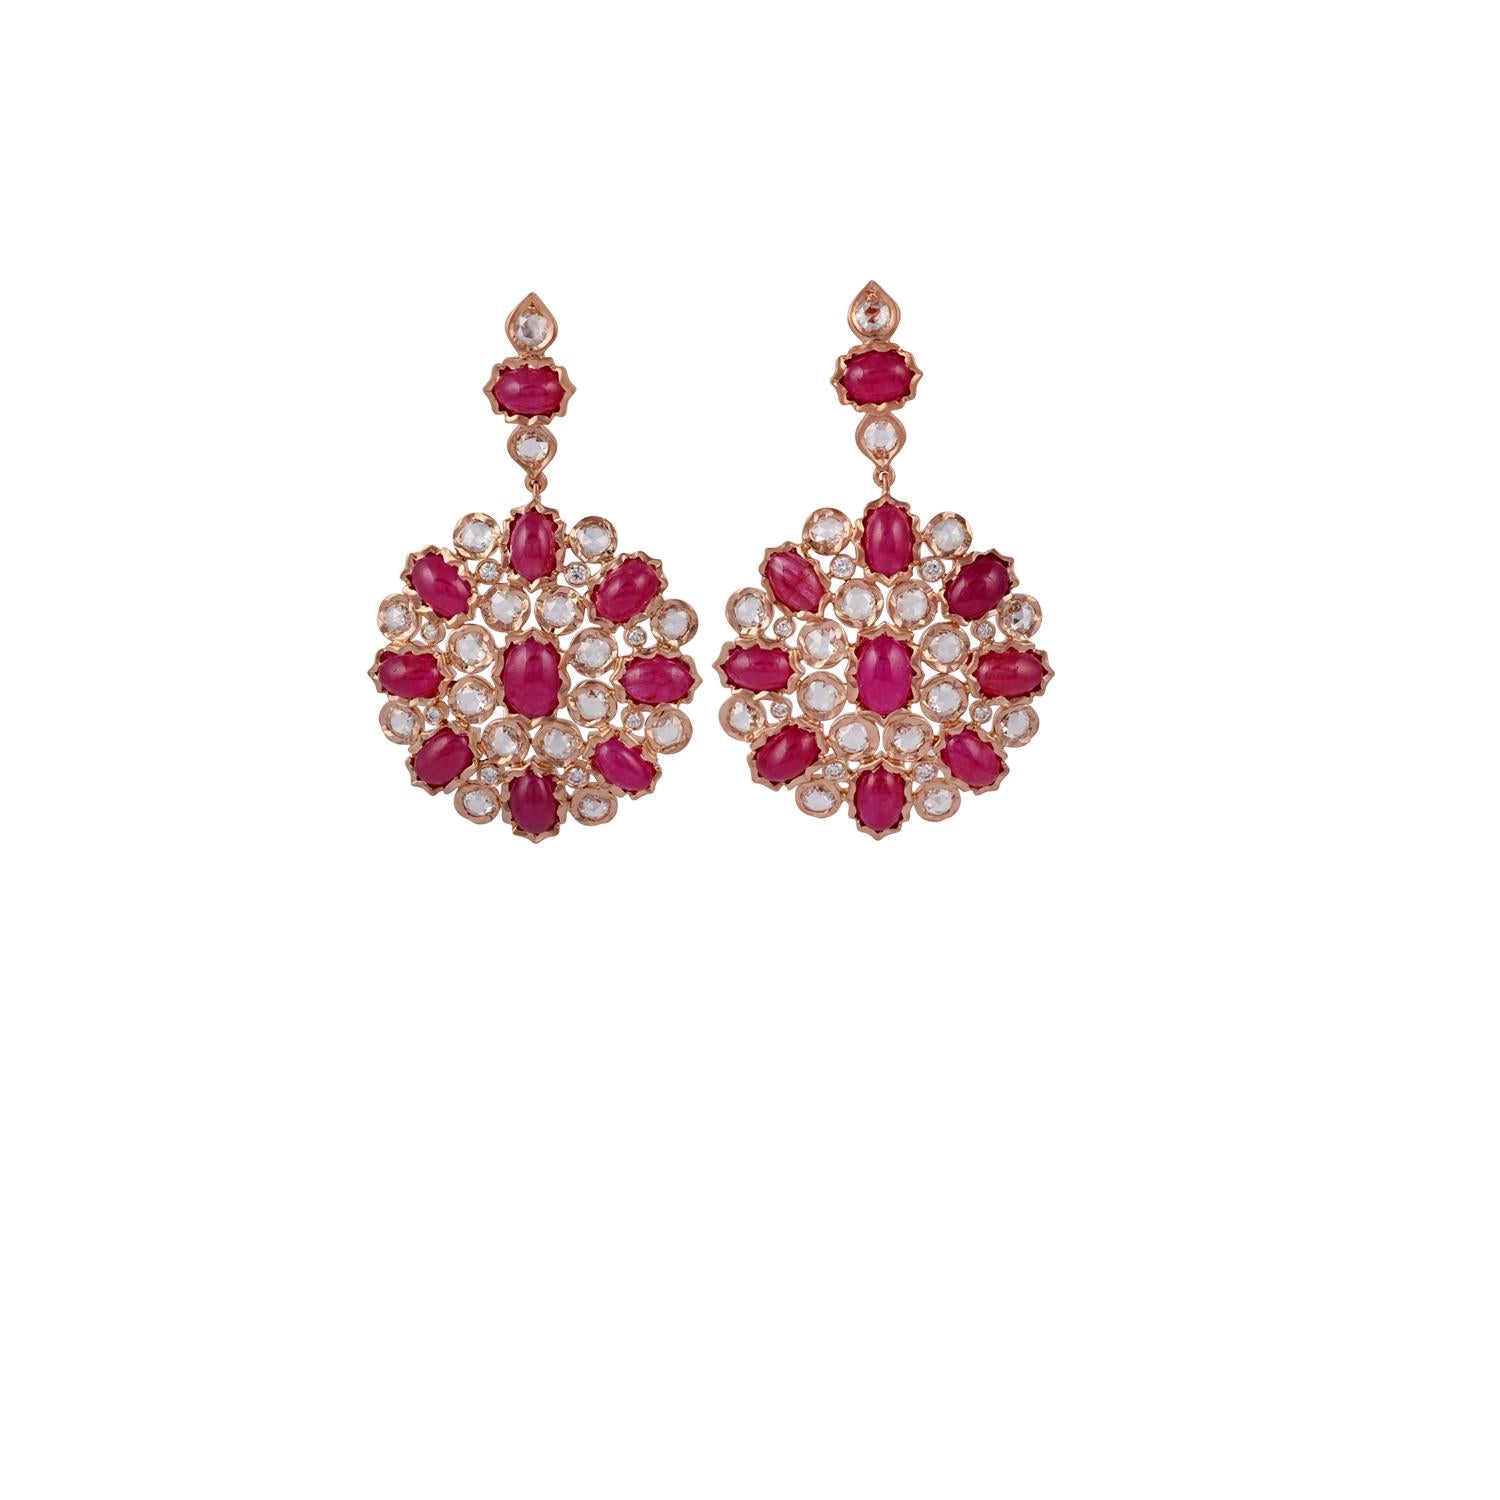 No gemstone represents a celebration more than a bright, red ruby and these amazing chandelier earrings have 20 of them. white Rose cut & full cut  diamonds also hold their own at any festive event. The design of the earrings is classical and will